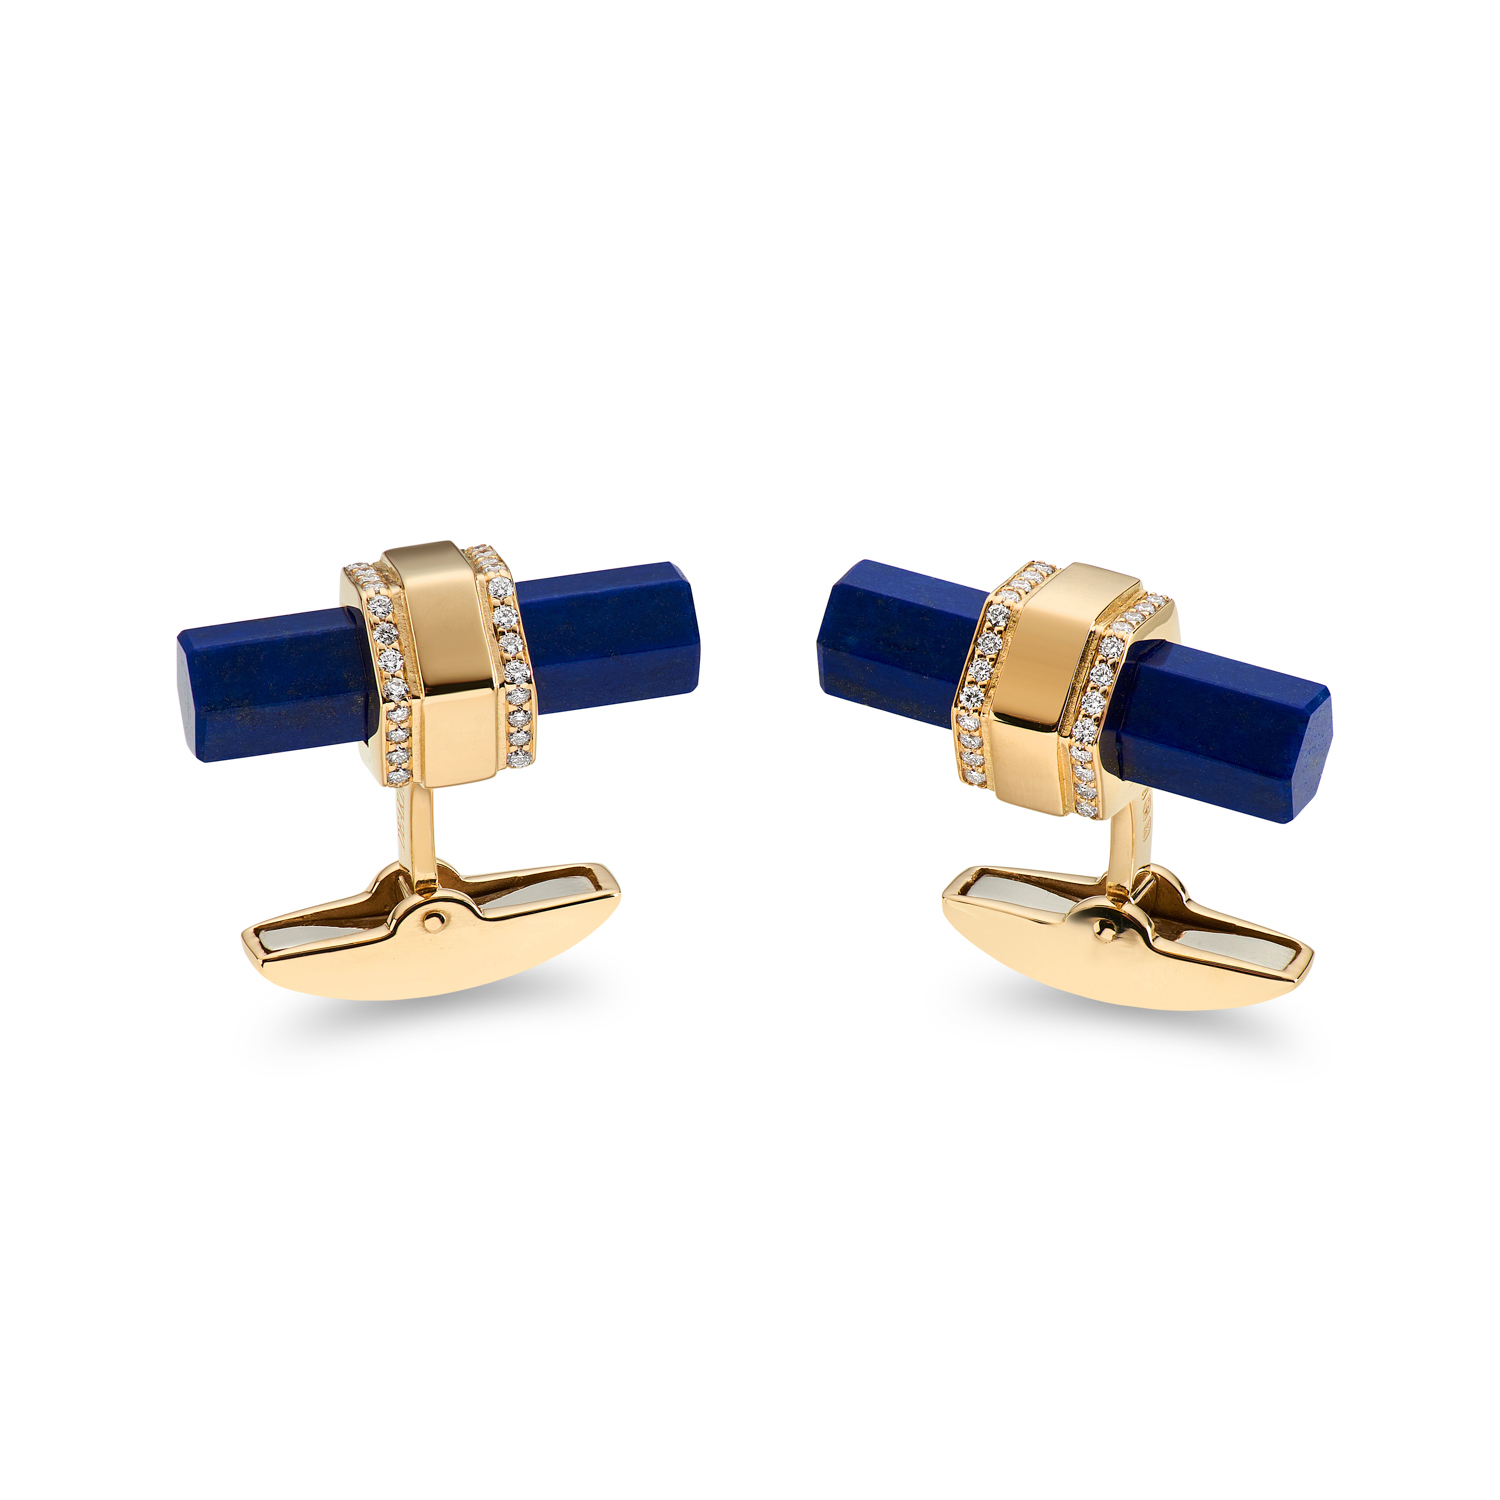 The Ultimate Style with Cufflinks